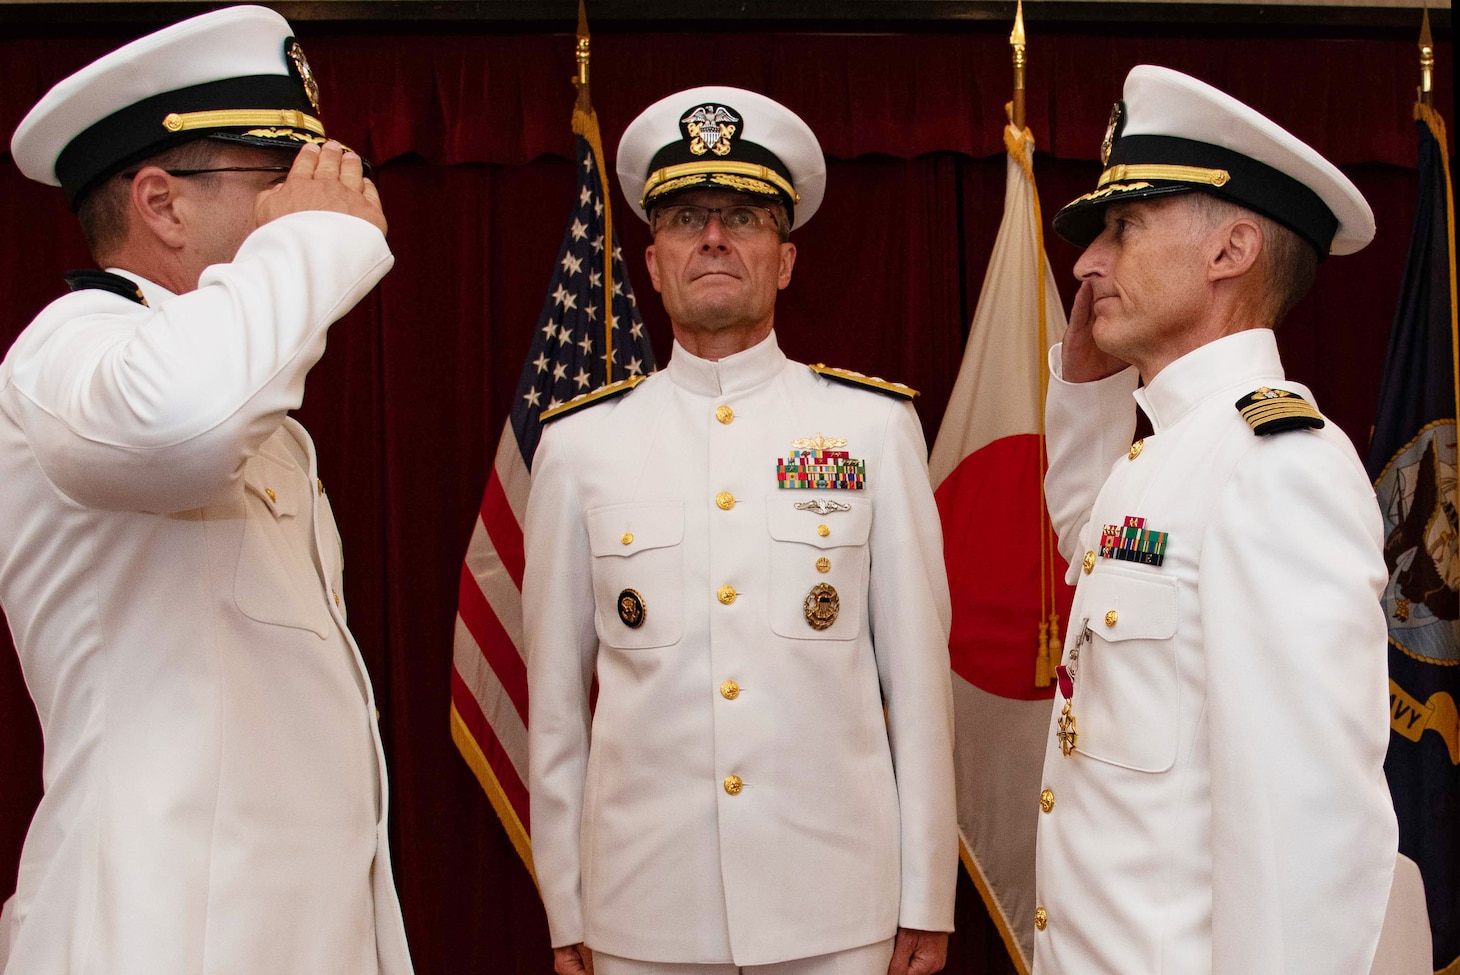 DSO Pacific Change of Command 2021